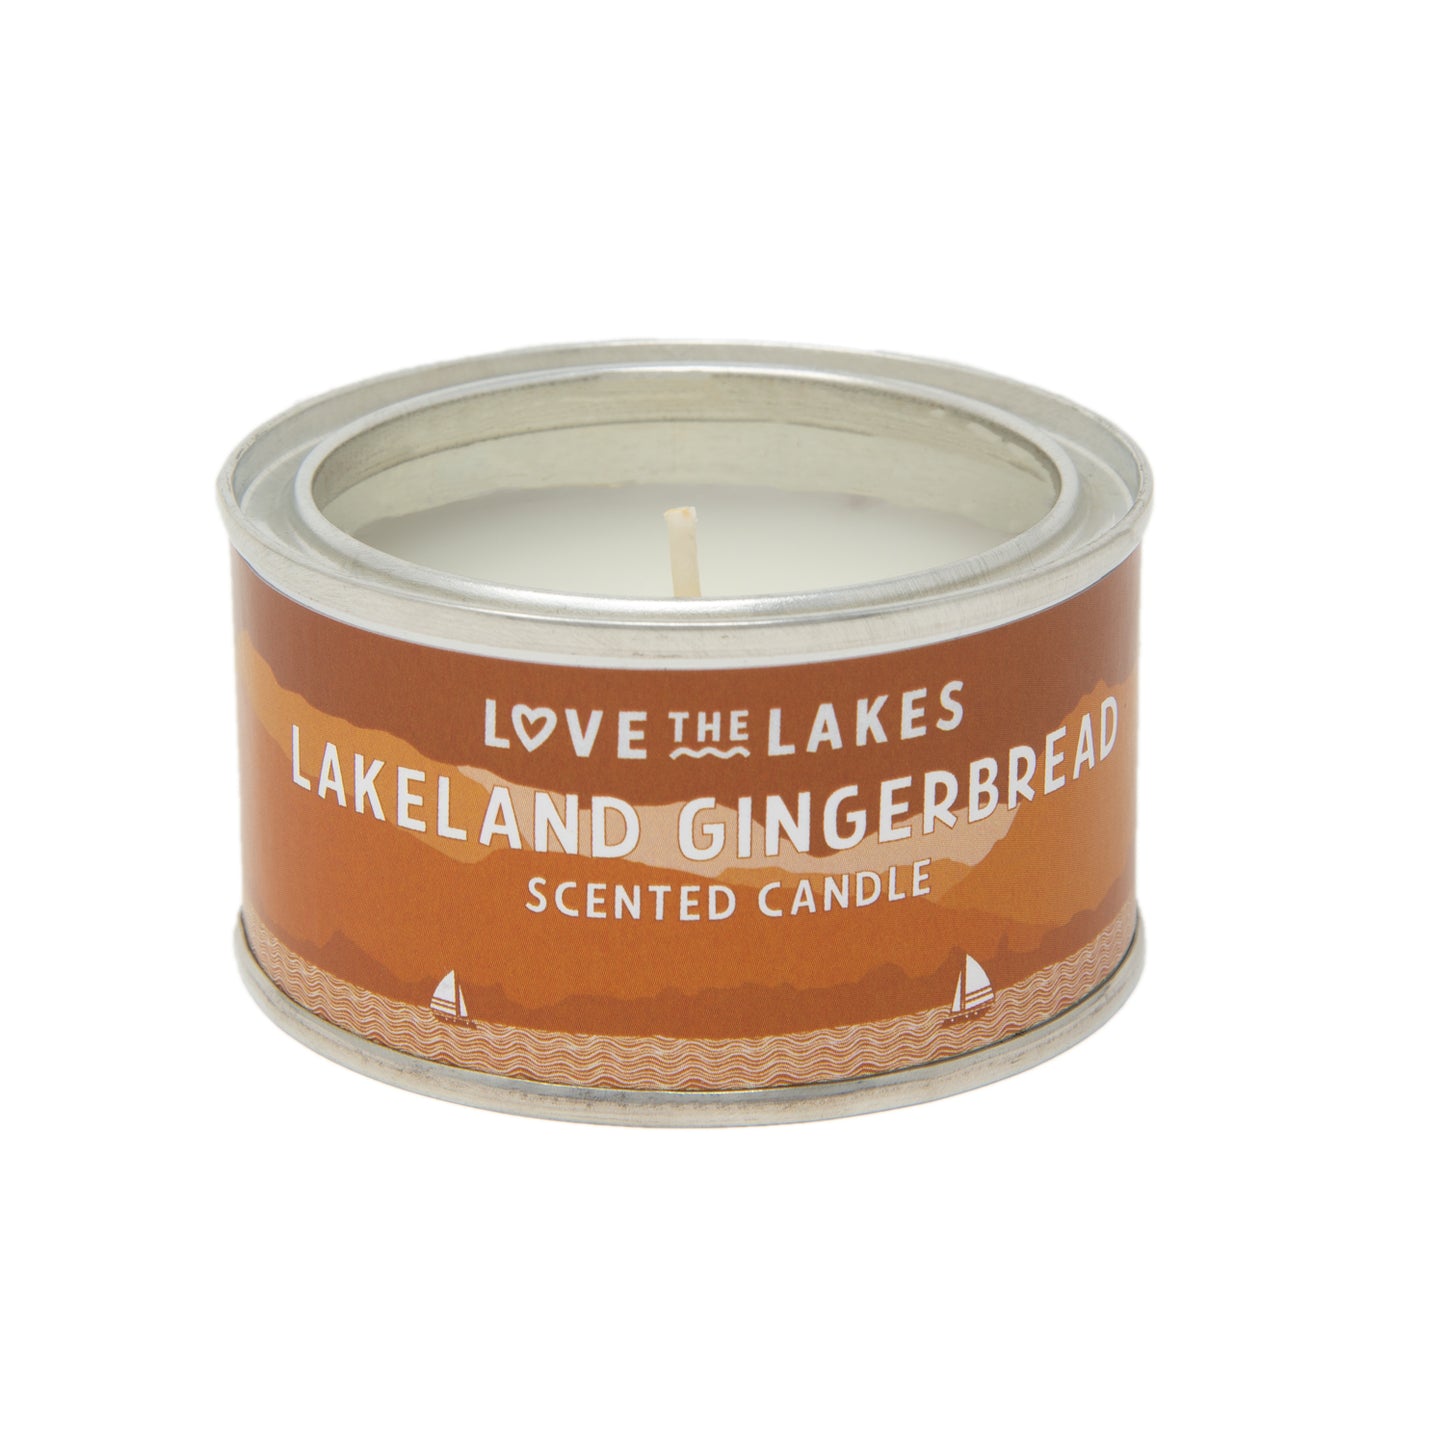 Love the Lakes Lakeland Gingerbread Candle  - 3 sizes